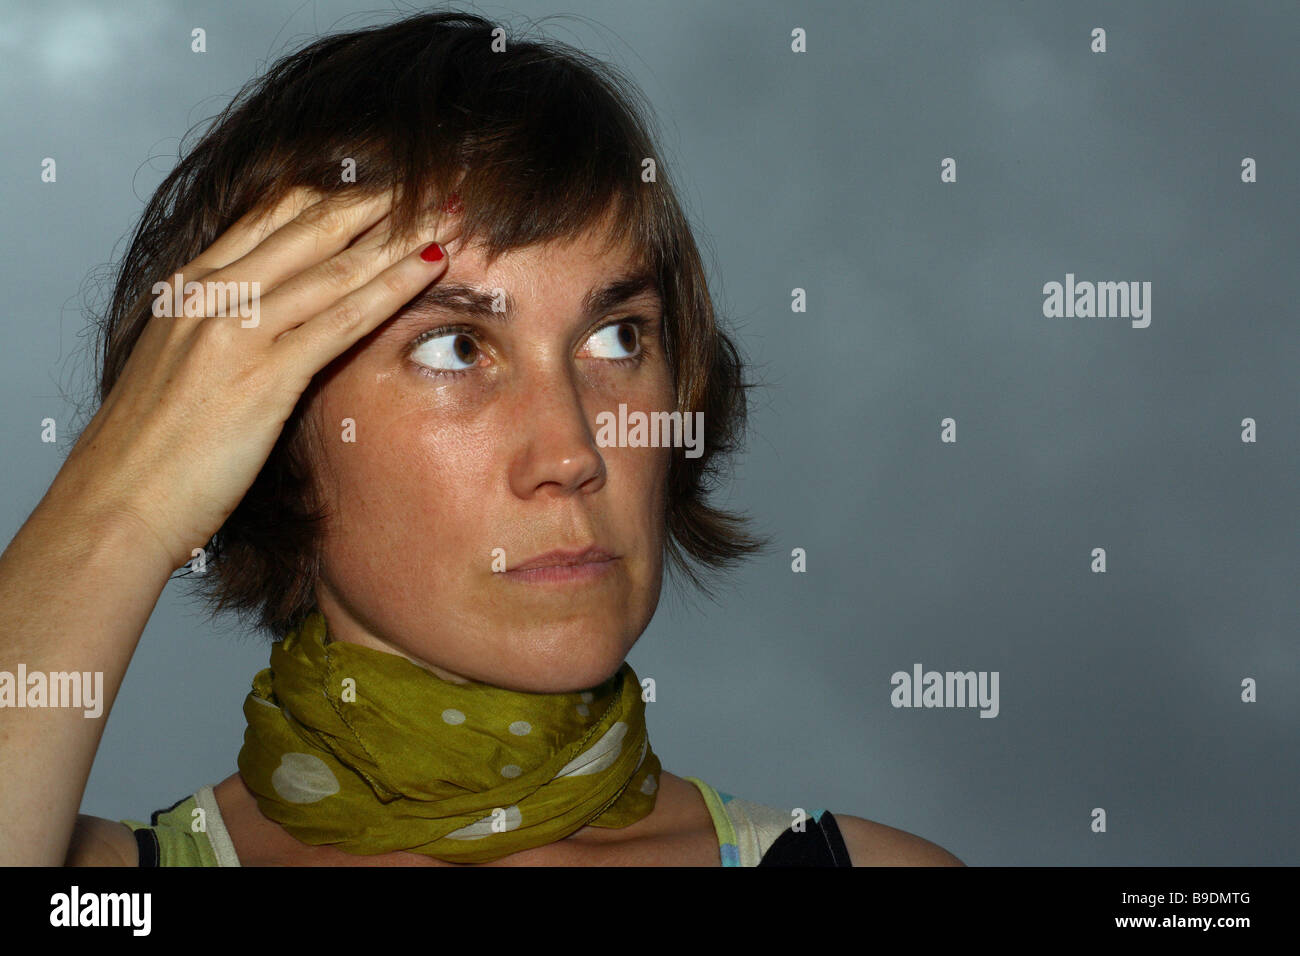 Stock Photo - Woman with headache in front of a dark rainy sky - woman-with-headache-in-front-of-a-dark-rainy-sky-B9DMTG